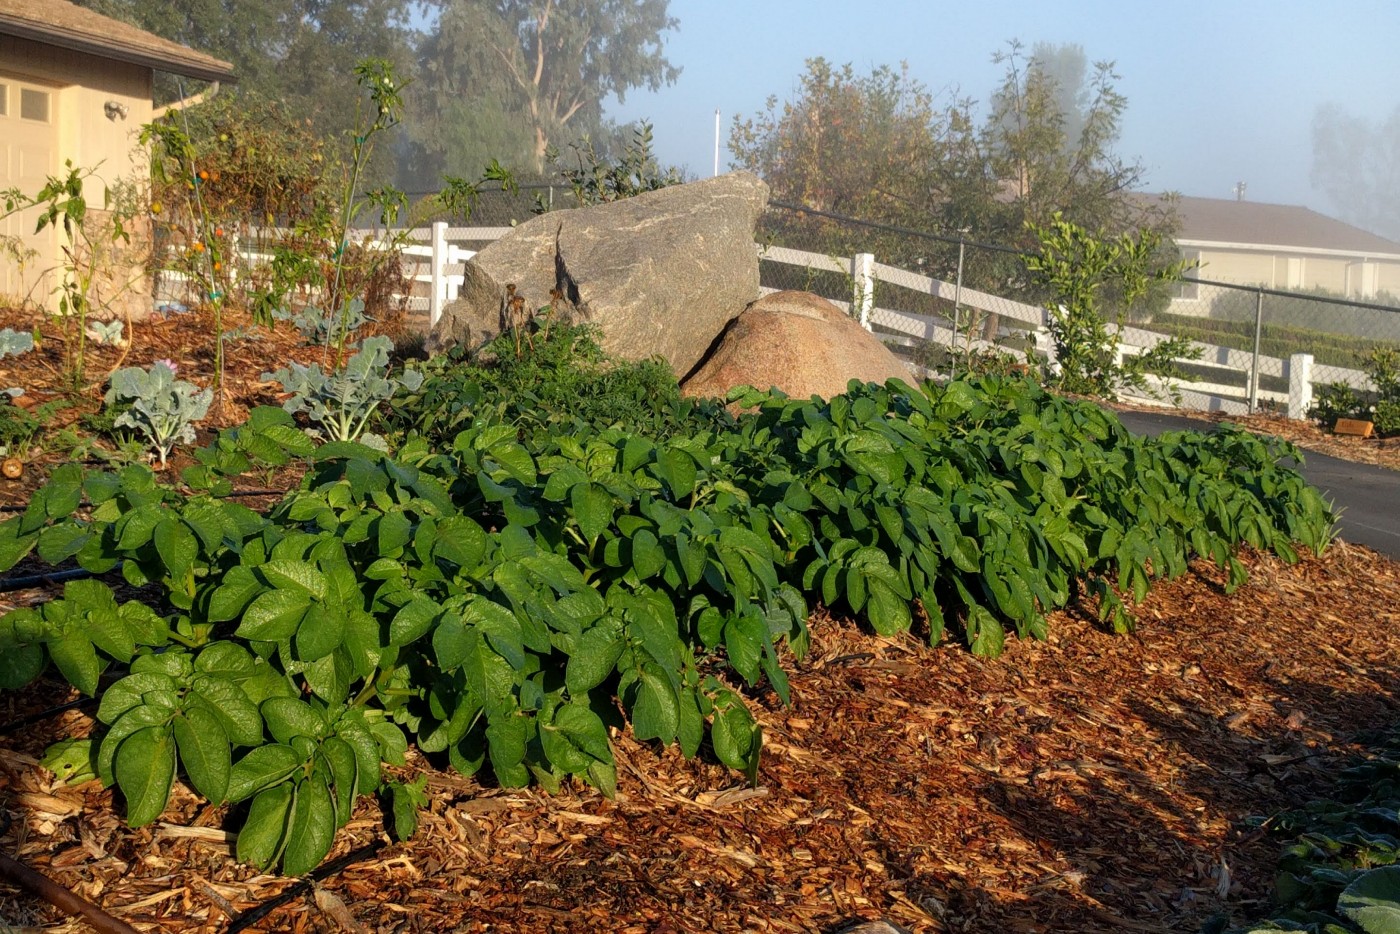 Image of Vegetable garden mulched with wood chips